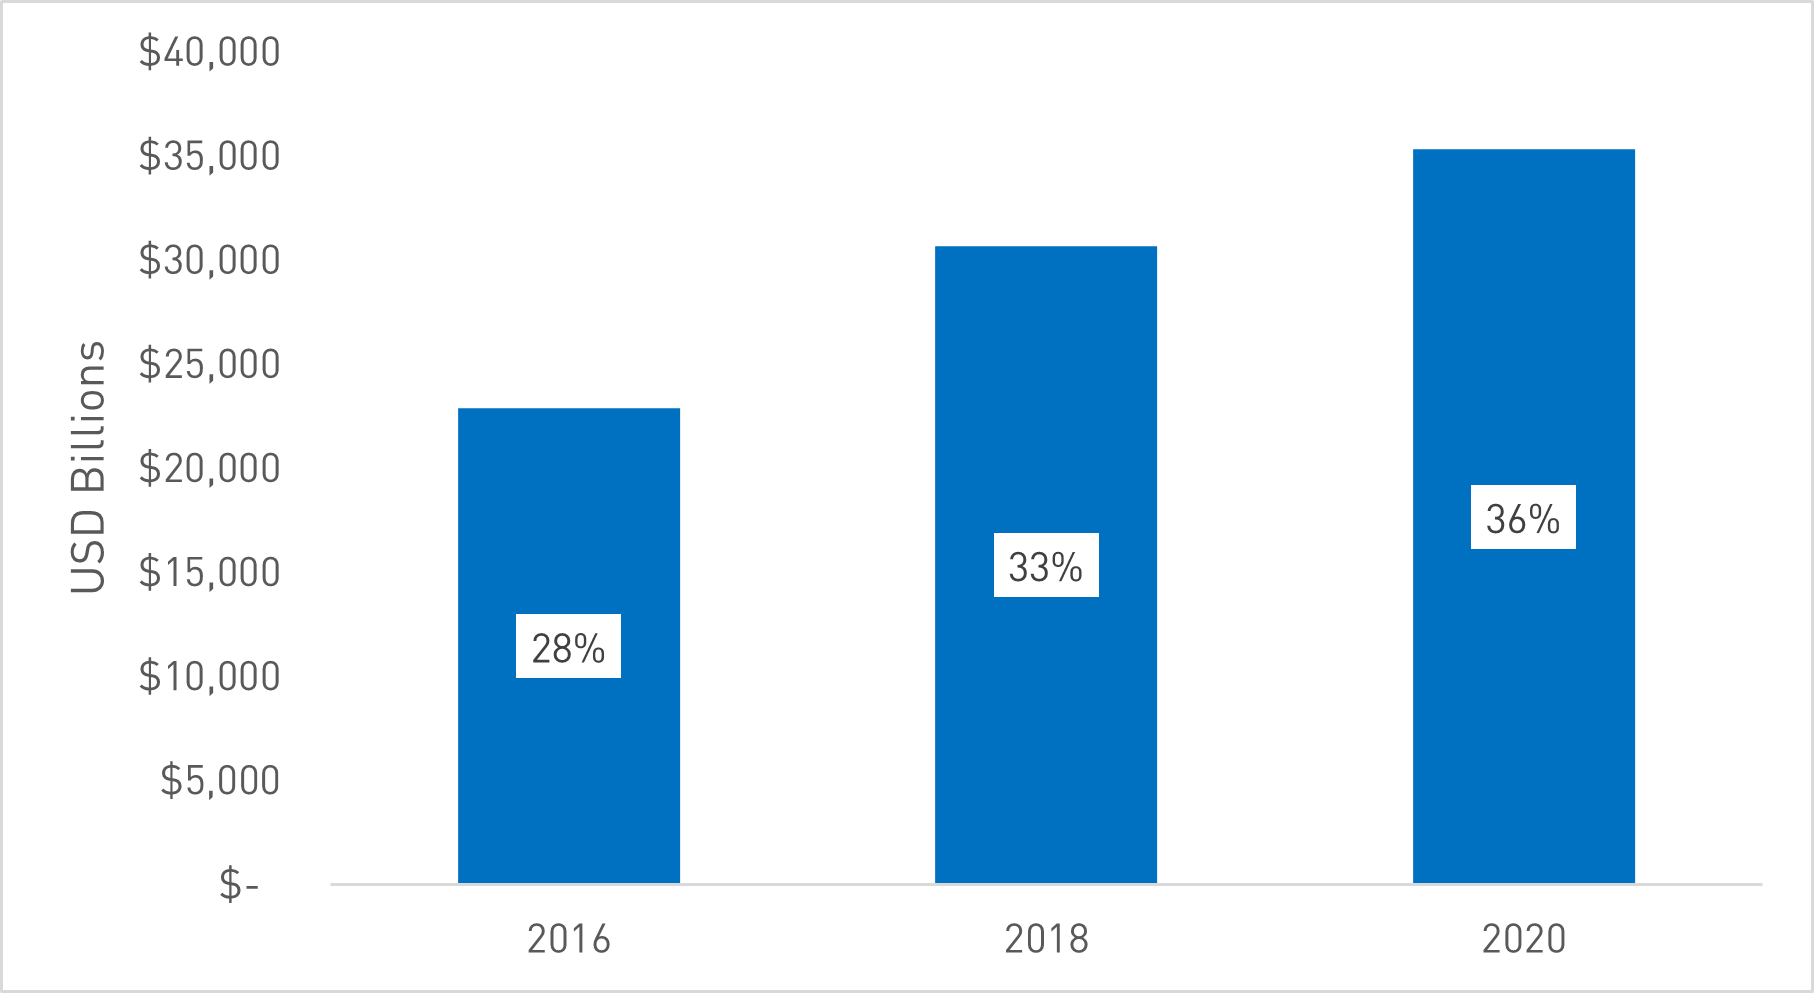 Percentage of Total AUM that is ESG-Linked - 2016 at 28%, 2018 at 33%, and 2020 at 36%